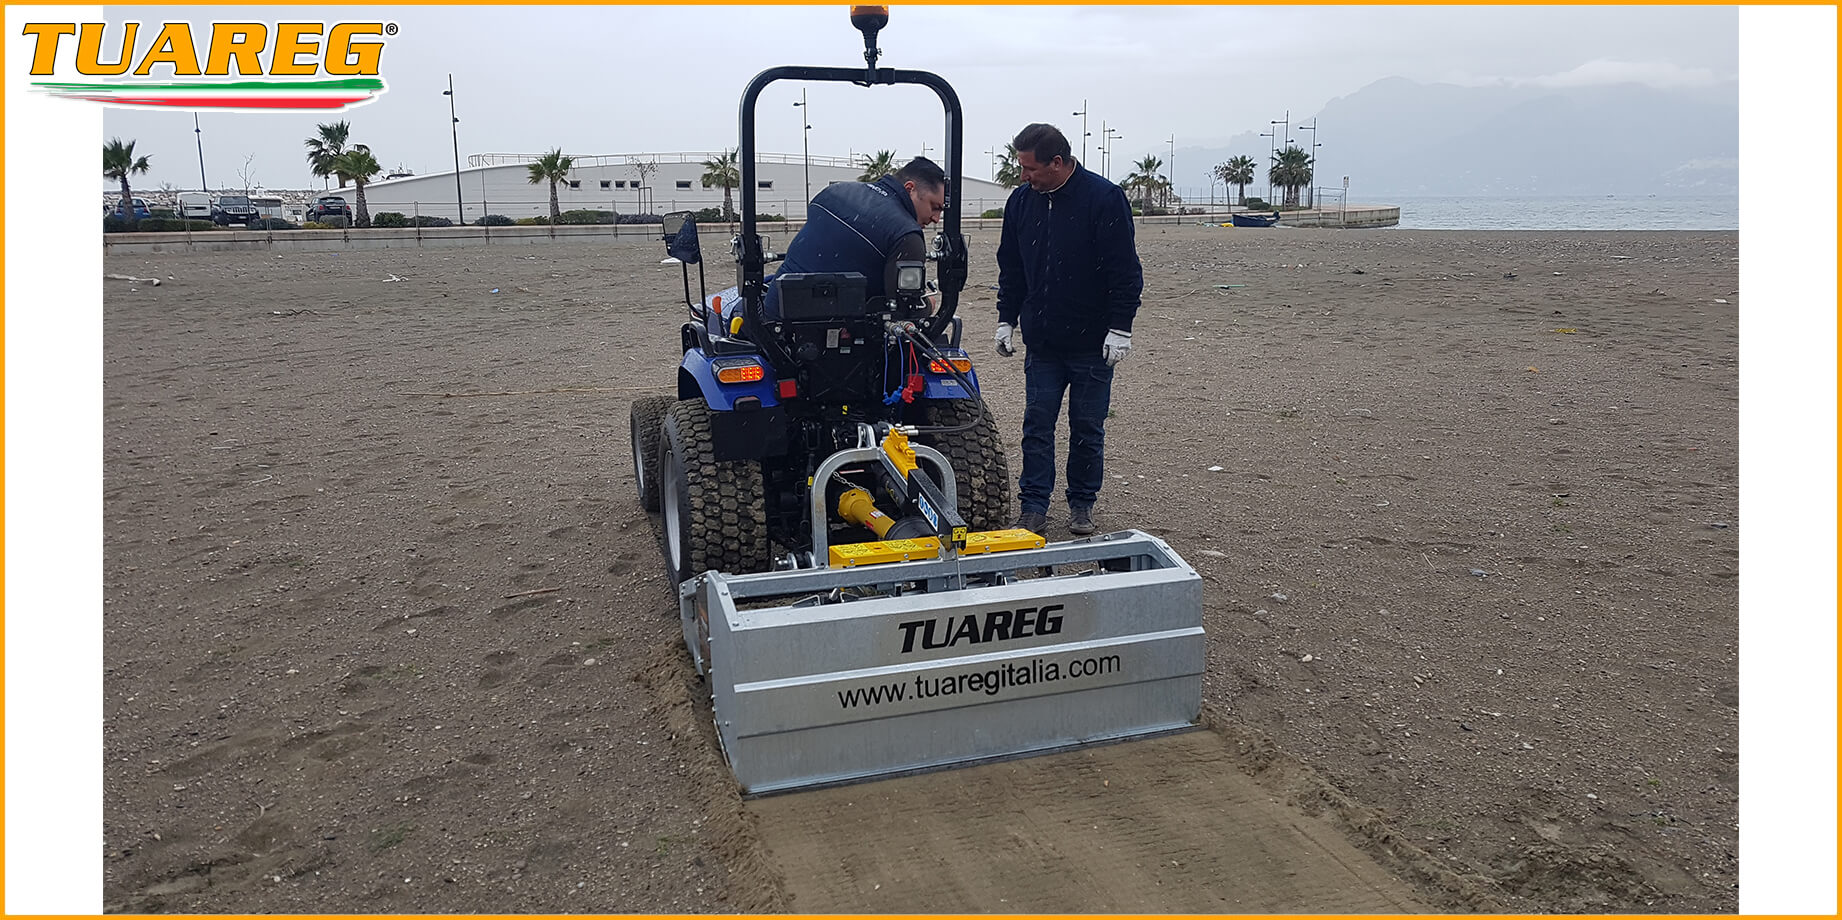 Tuareg EvoDynamic - Beach Cleaning Machine - Attached to a Tractor